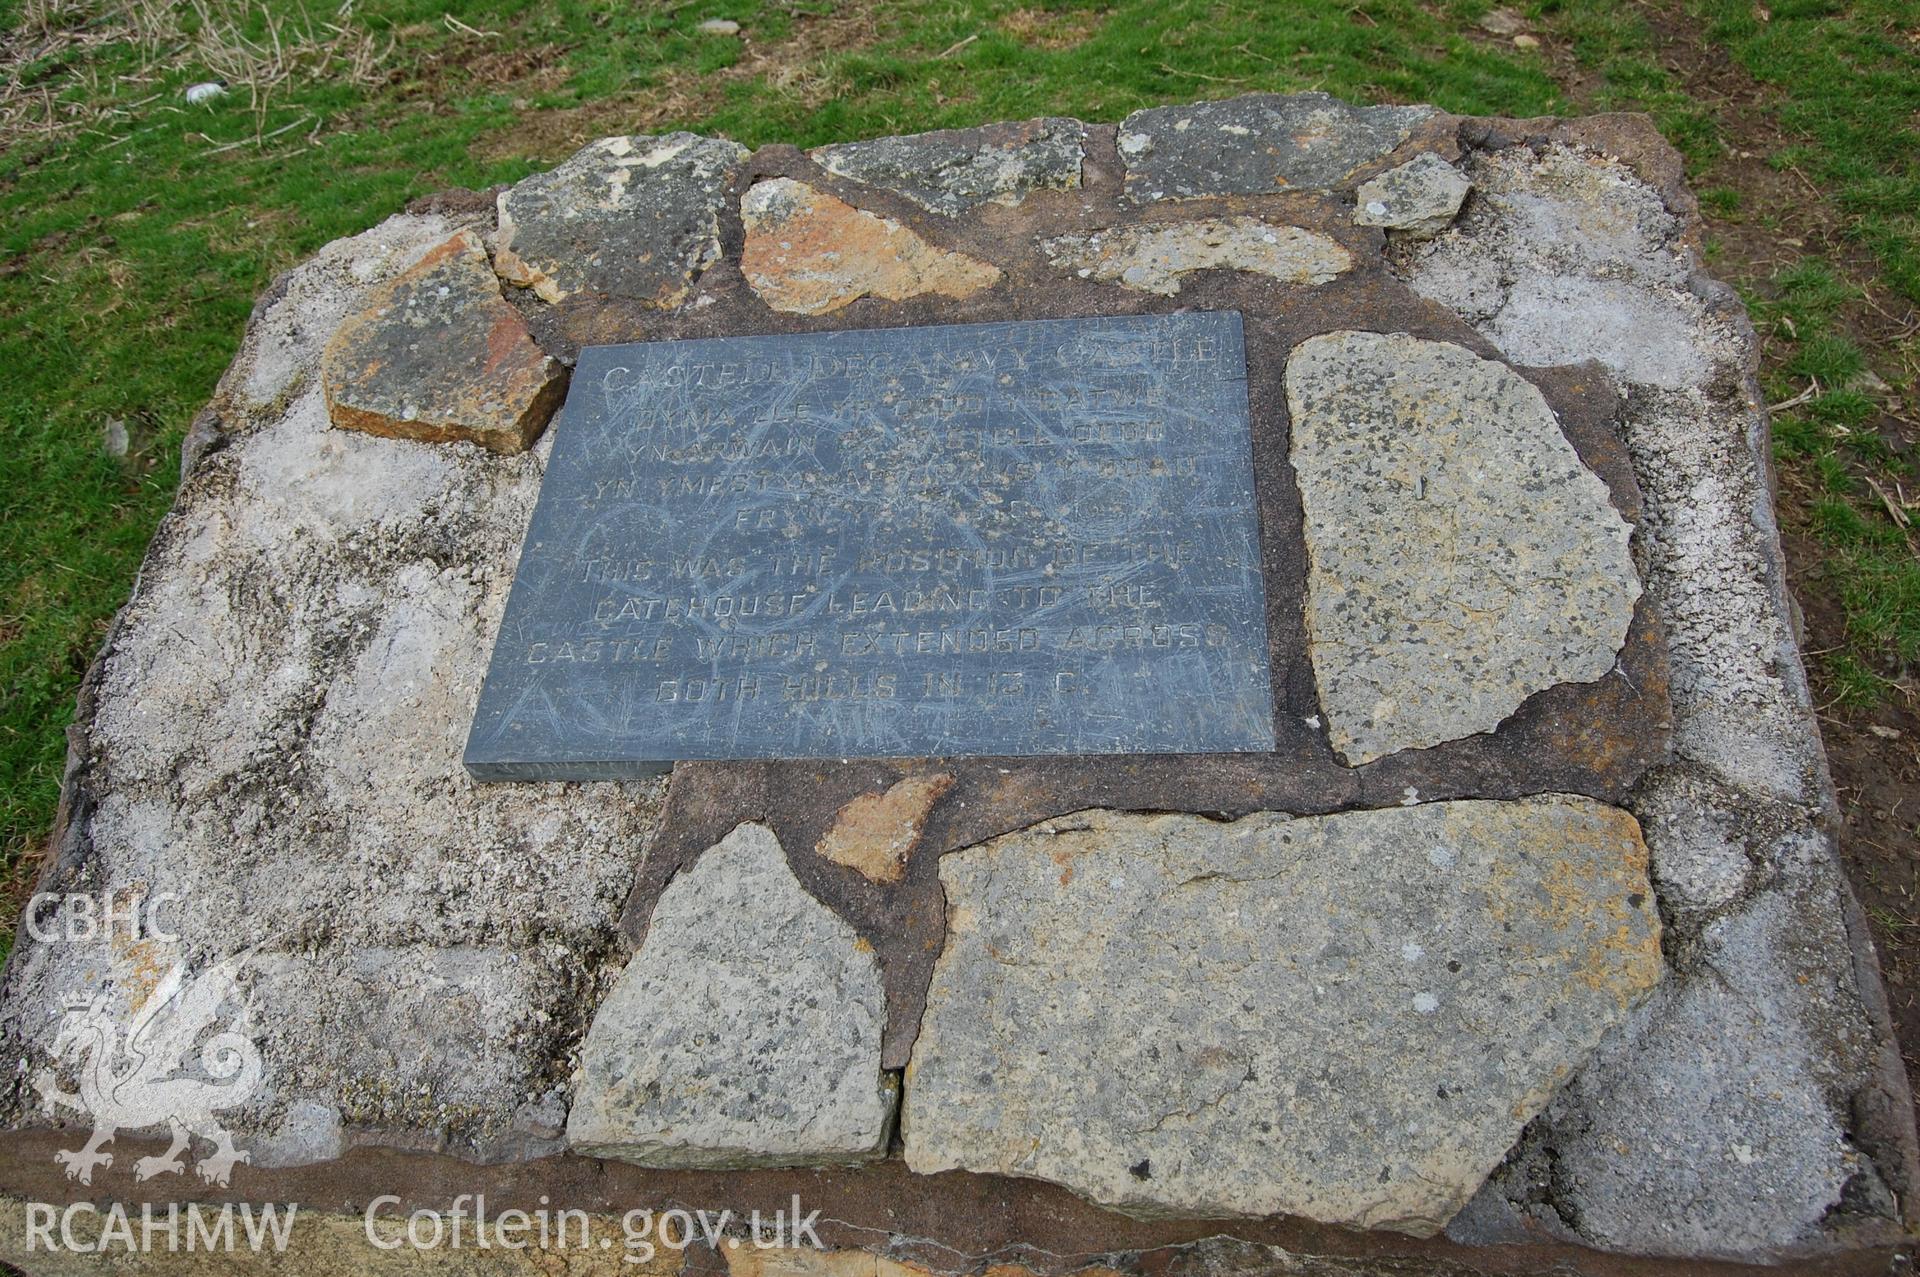 Digital photograph from an archaeological assessment of Deganwy Castle, carried out by Gwynedd Archaeological Trust, 2009. Slate plaque set up by a local group.